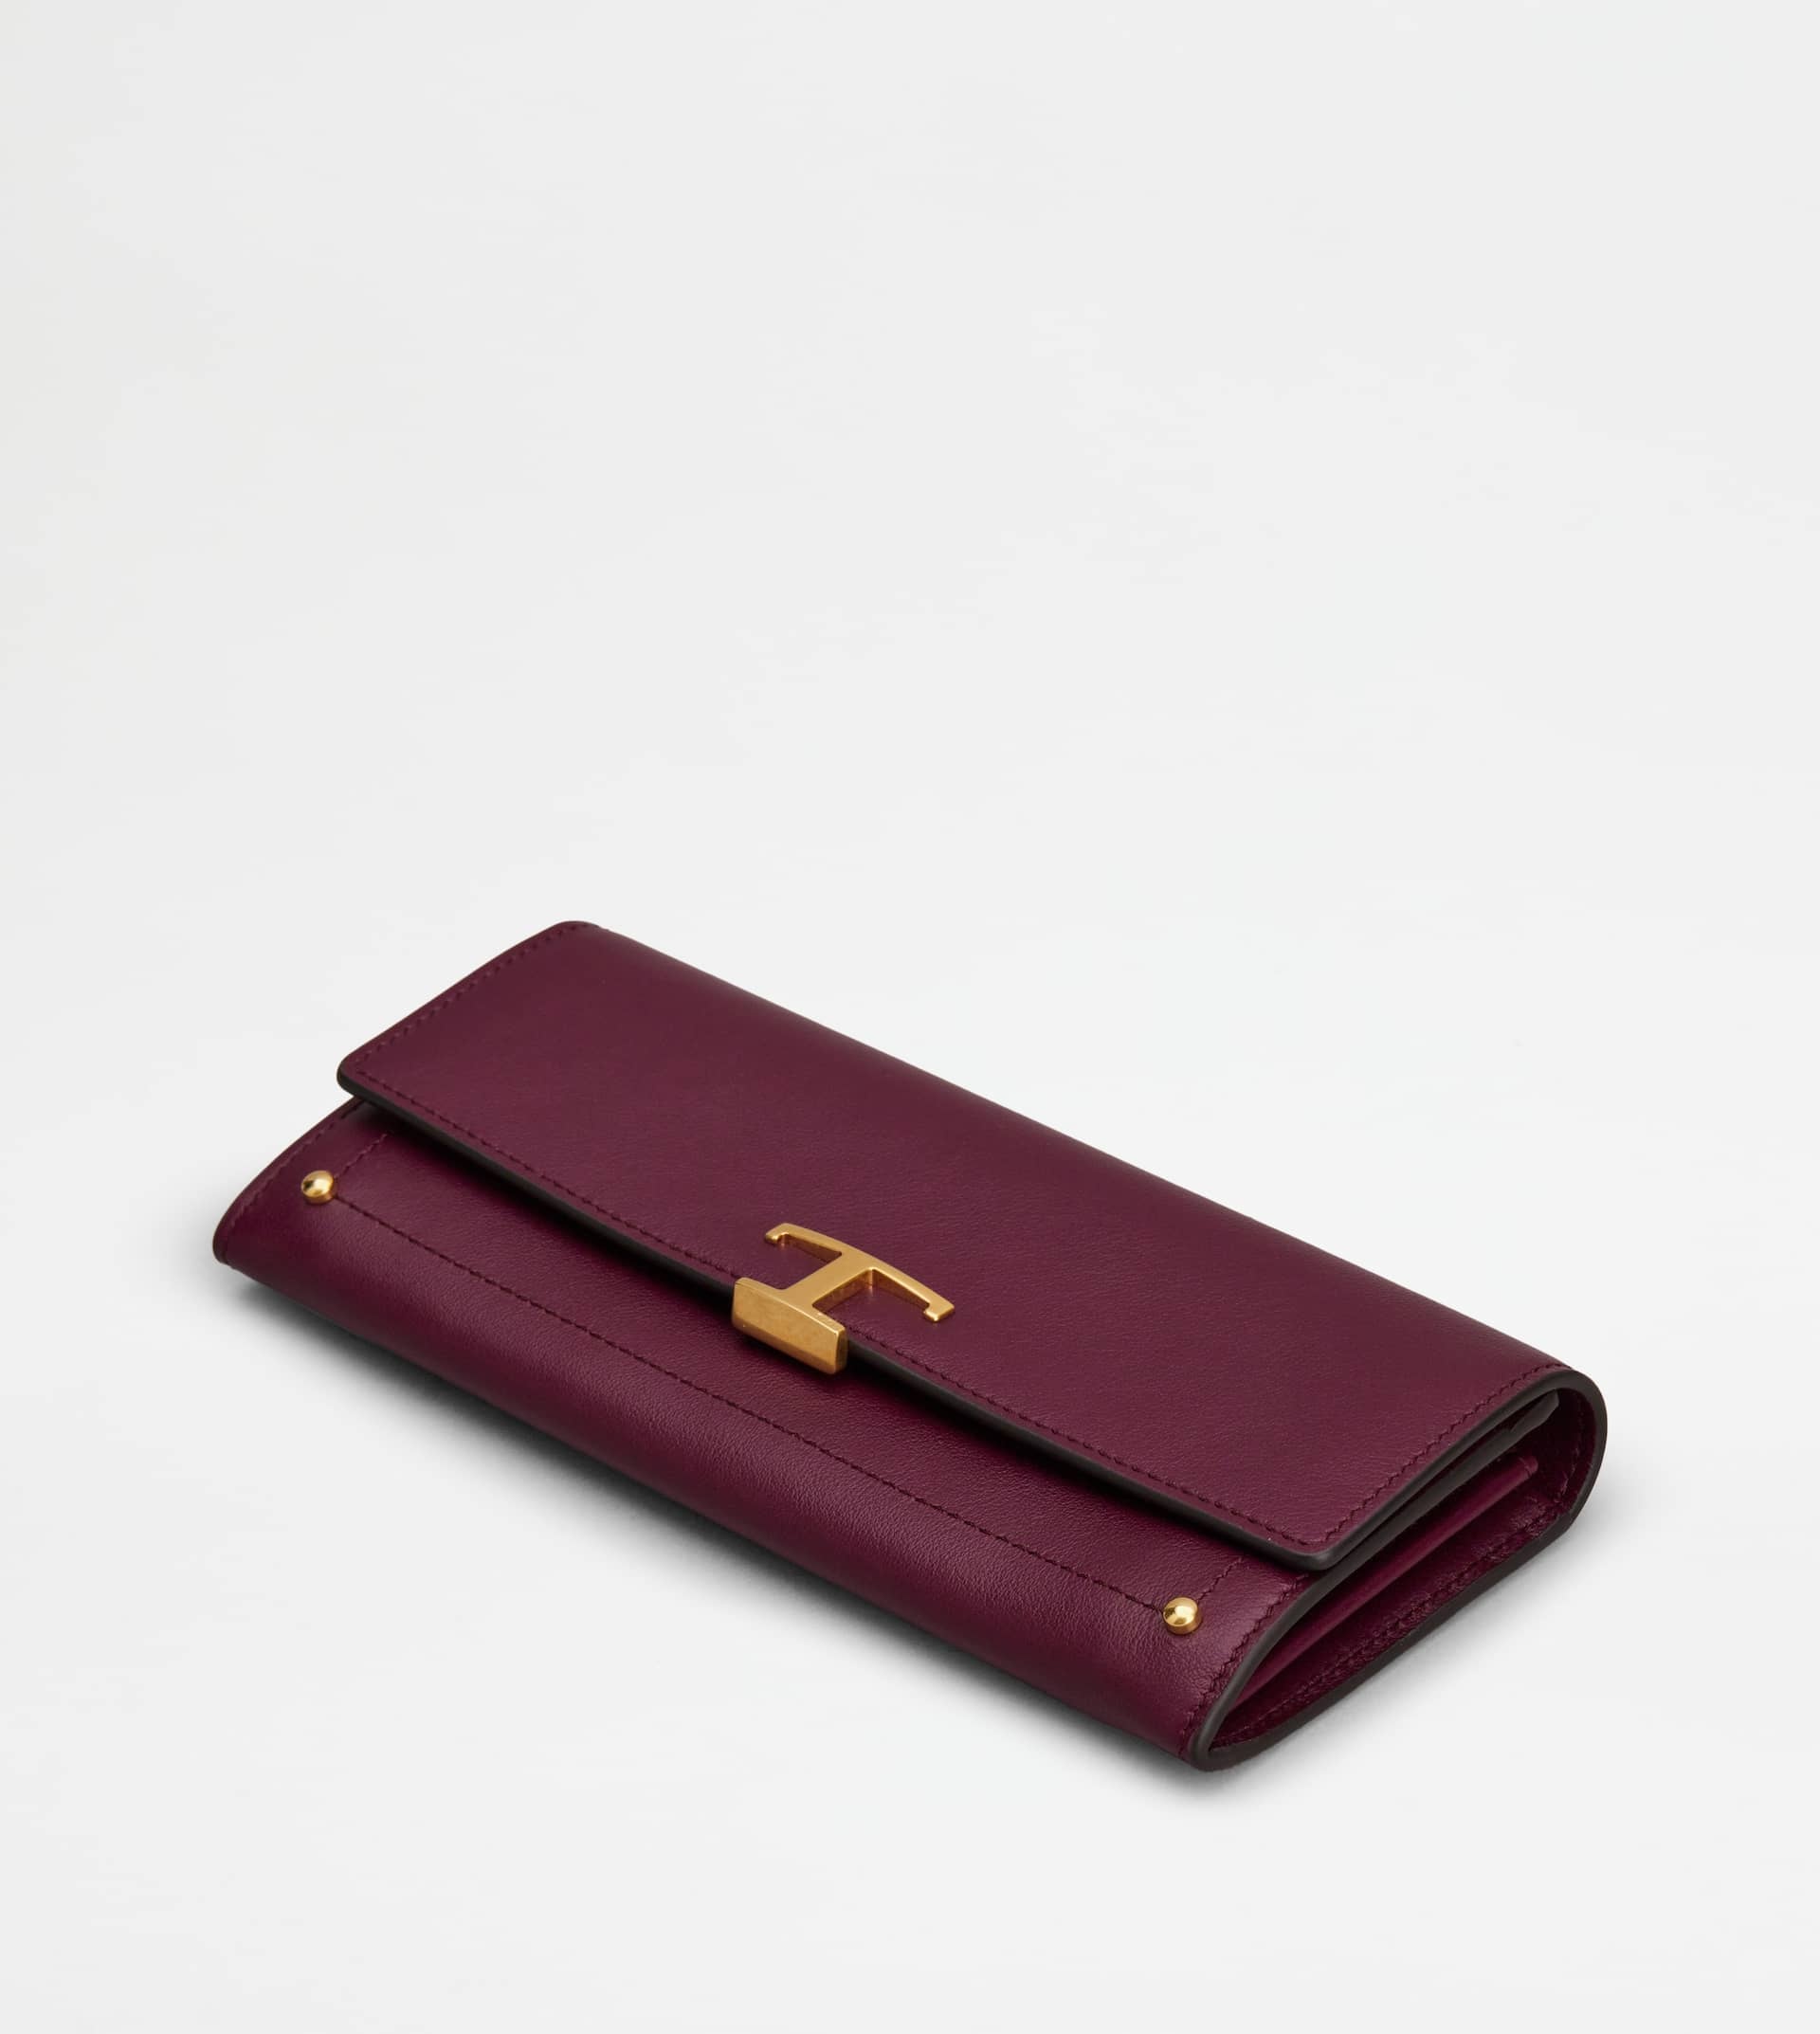 T TIMELESS WALLET IN LEATHER - BURGUNDY - 4